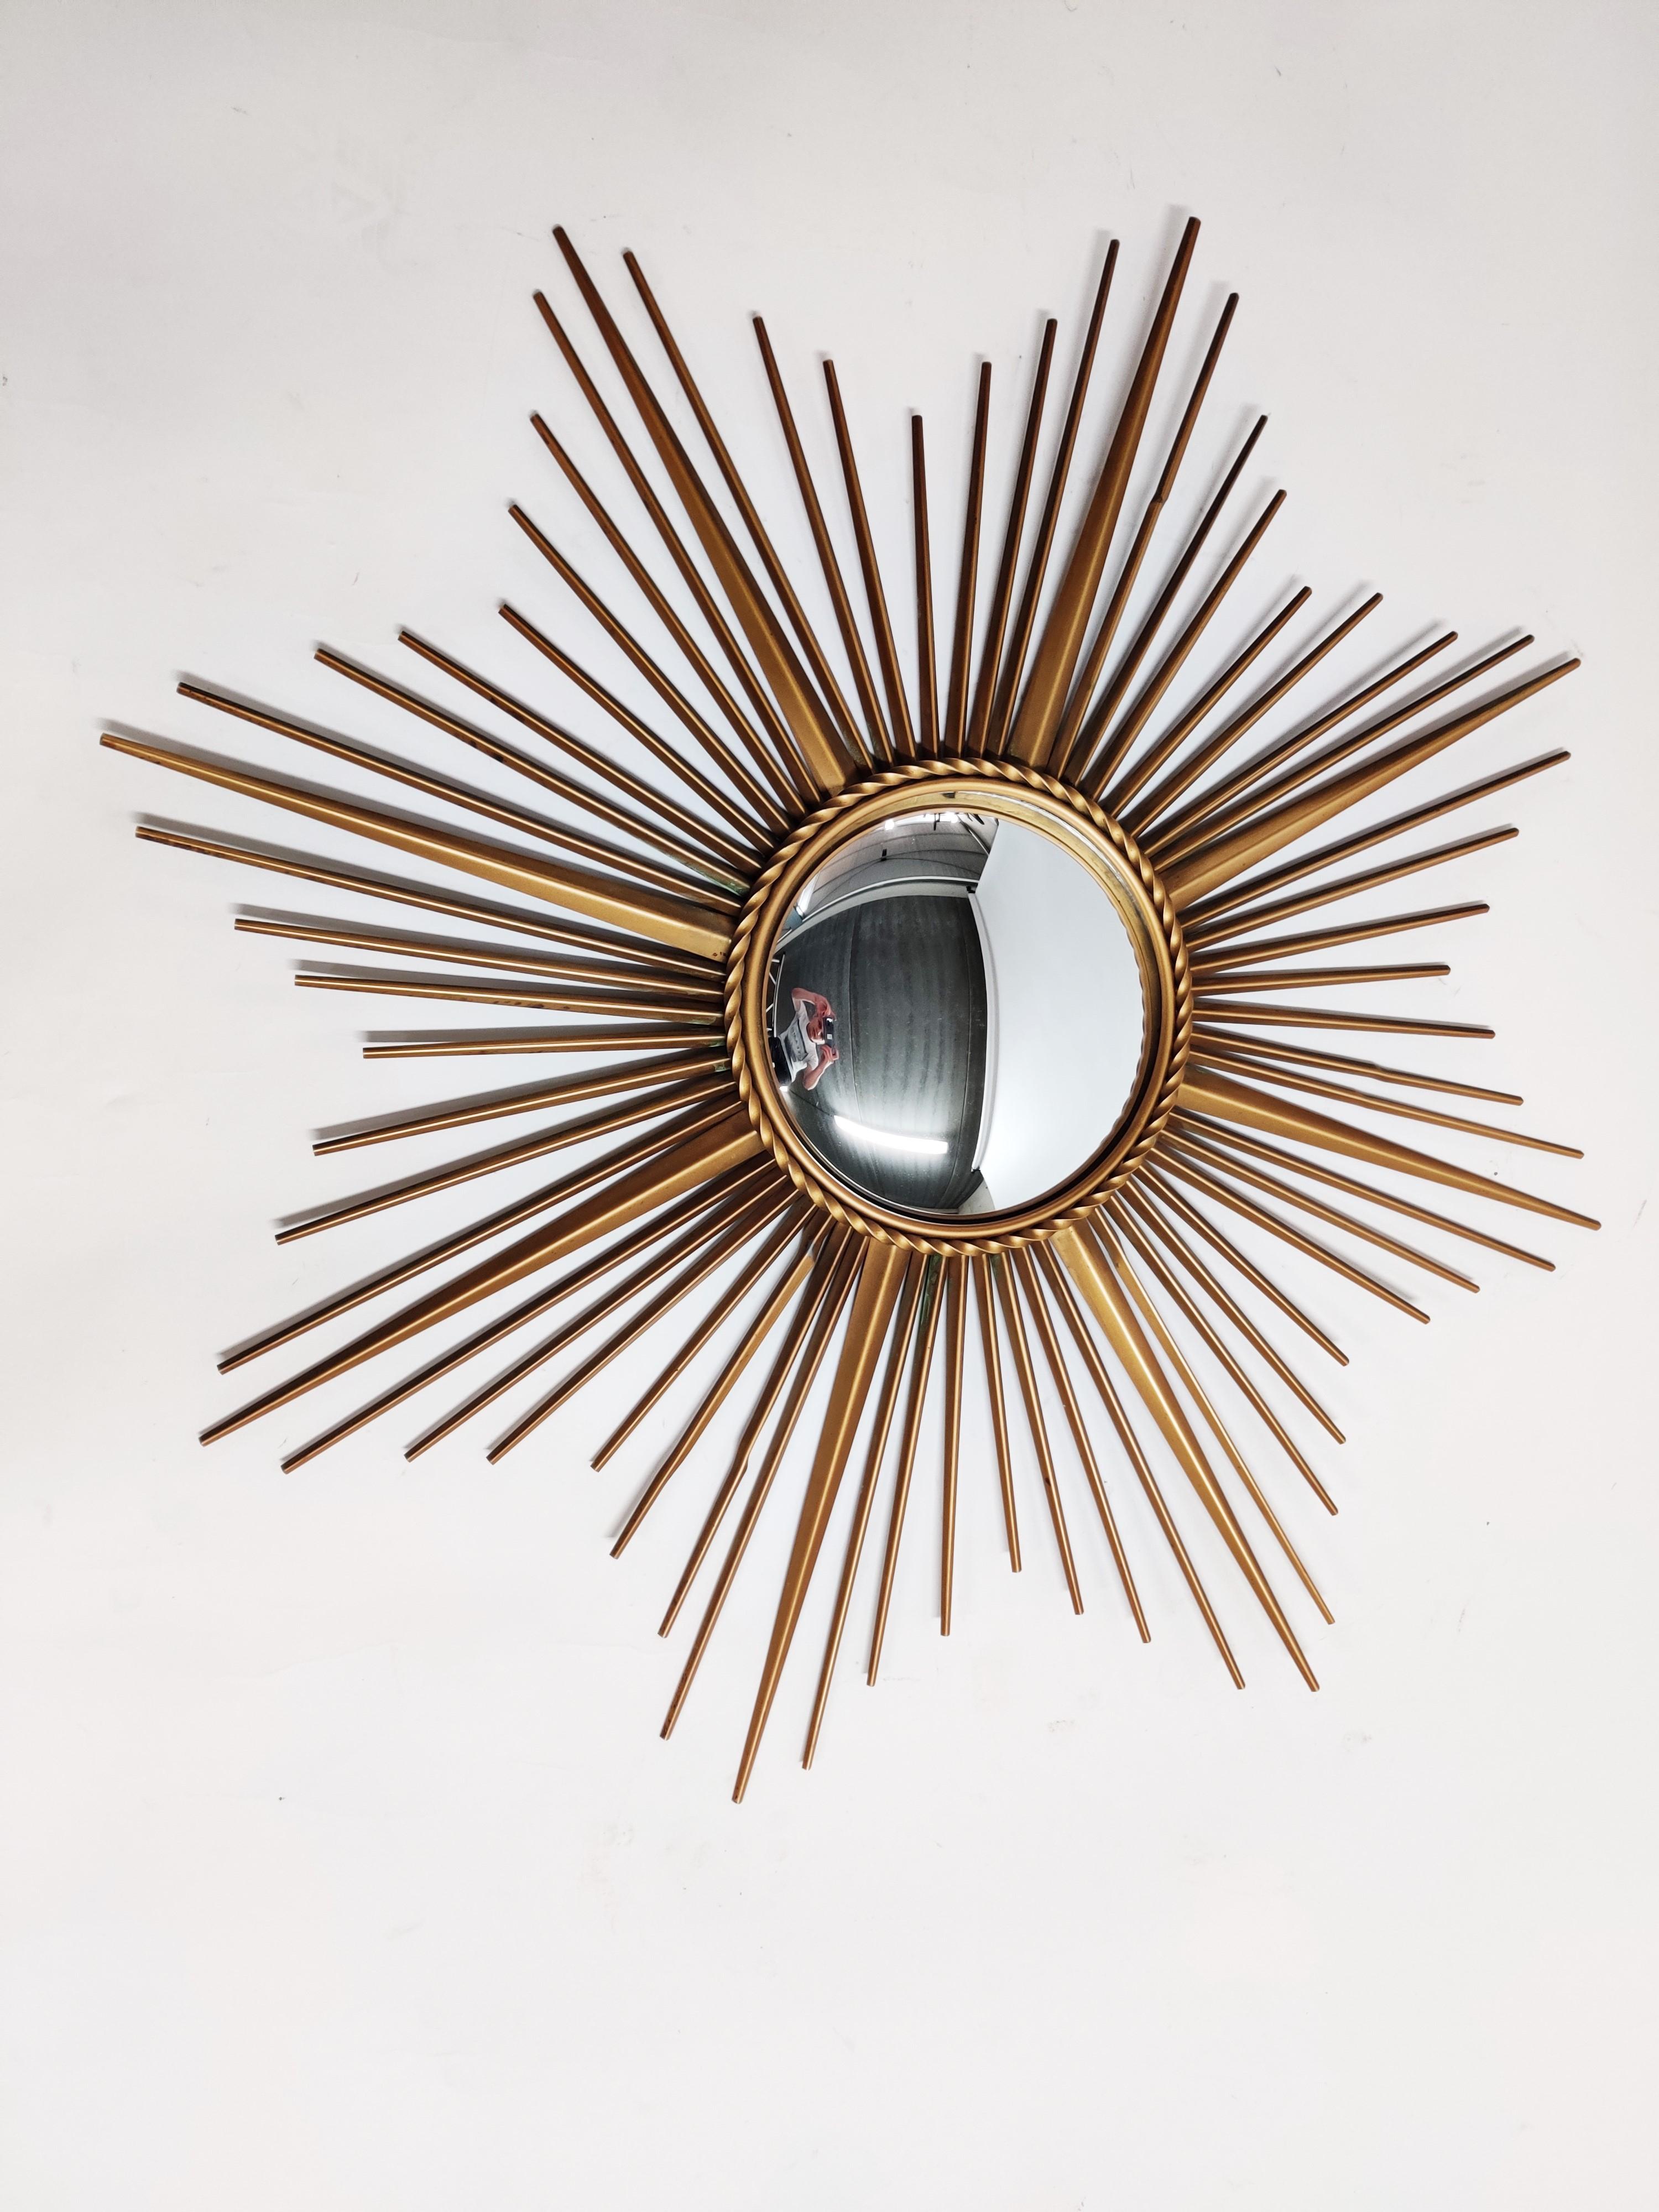 Impressive gilt metal sunburst mirror by Chaty Vallauris.

The large scale is wat really makes this piece stand out.

Condition:
Some 'sunrays' have been bended but the overall look is still amazing, glass is perfect.

Labeled at the